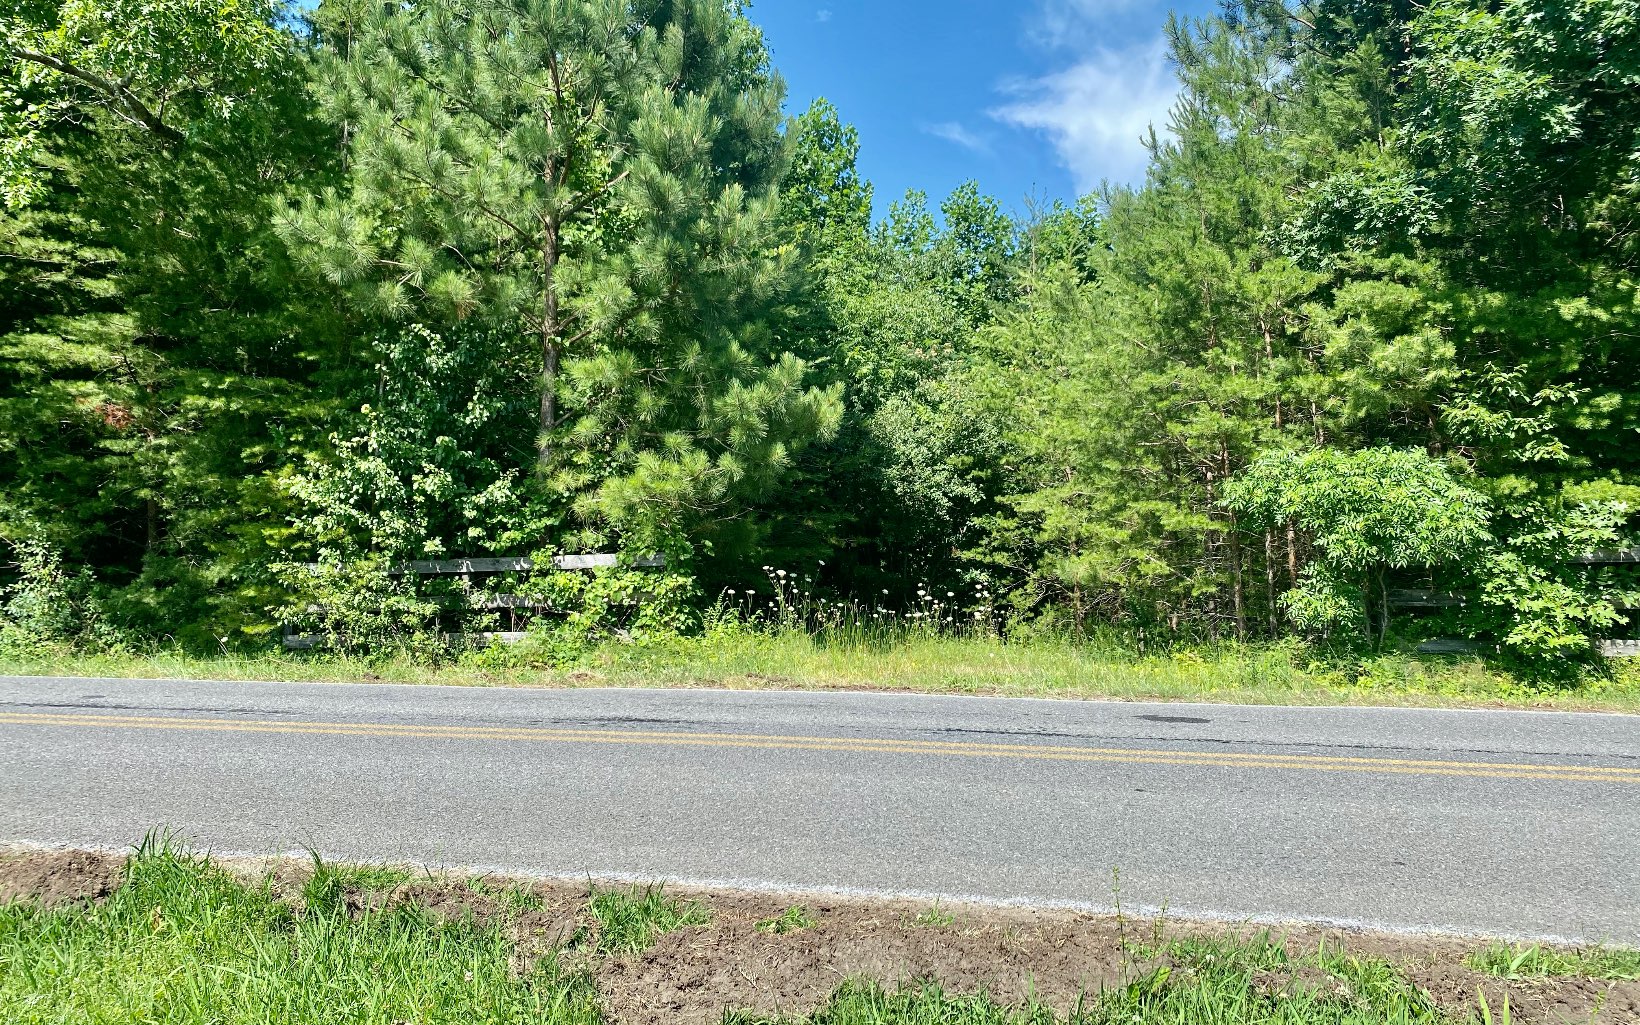 LONG RANGE YEAR AROUND MOUNTAIN VIEW ACREAGE - 3.96 Acres located in Beautiful Ellijay, Georgia. Only minutes from Downtown Ellijay, Paved Road Frontage, Electric Near Property, Hardwood Trees.